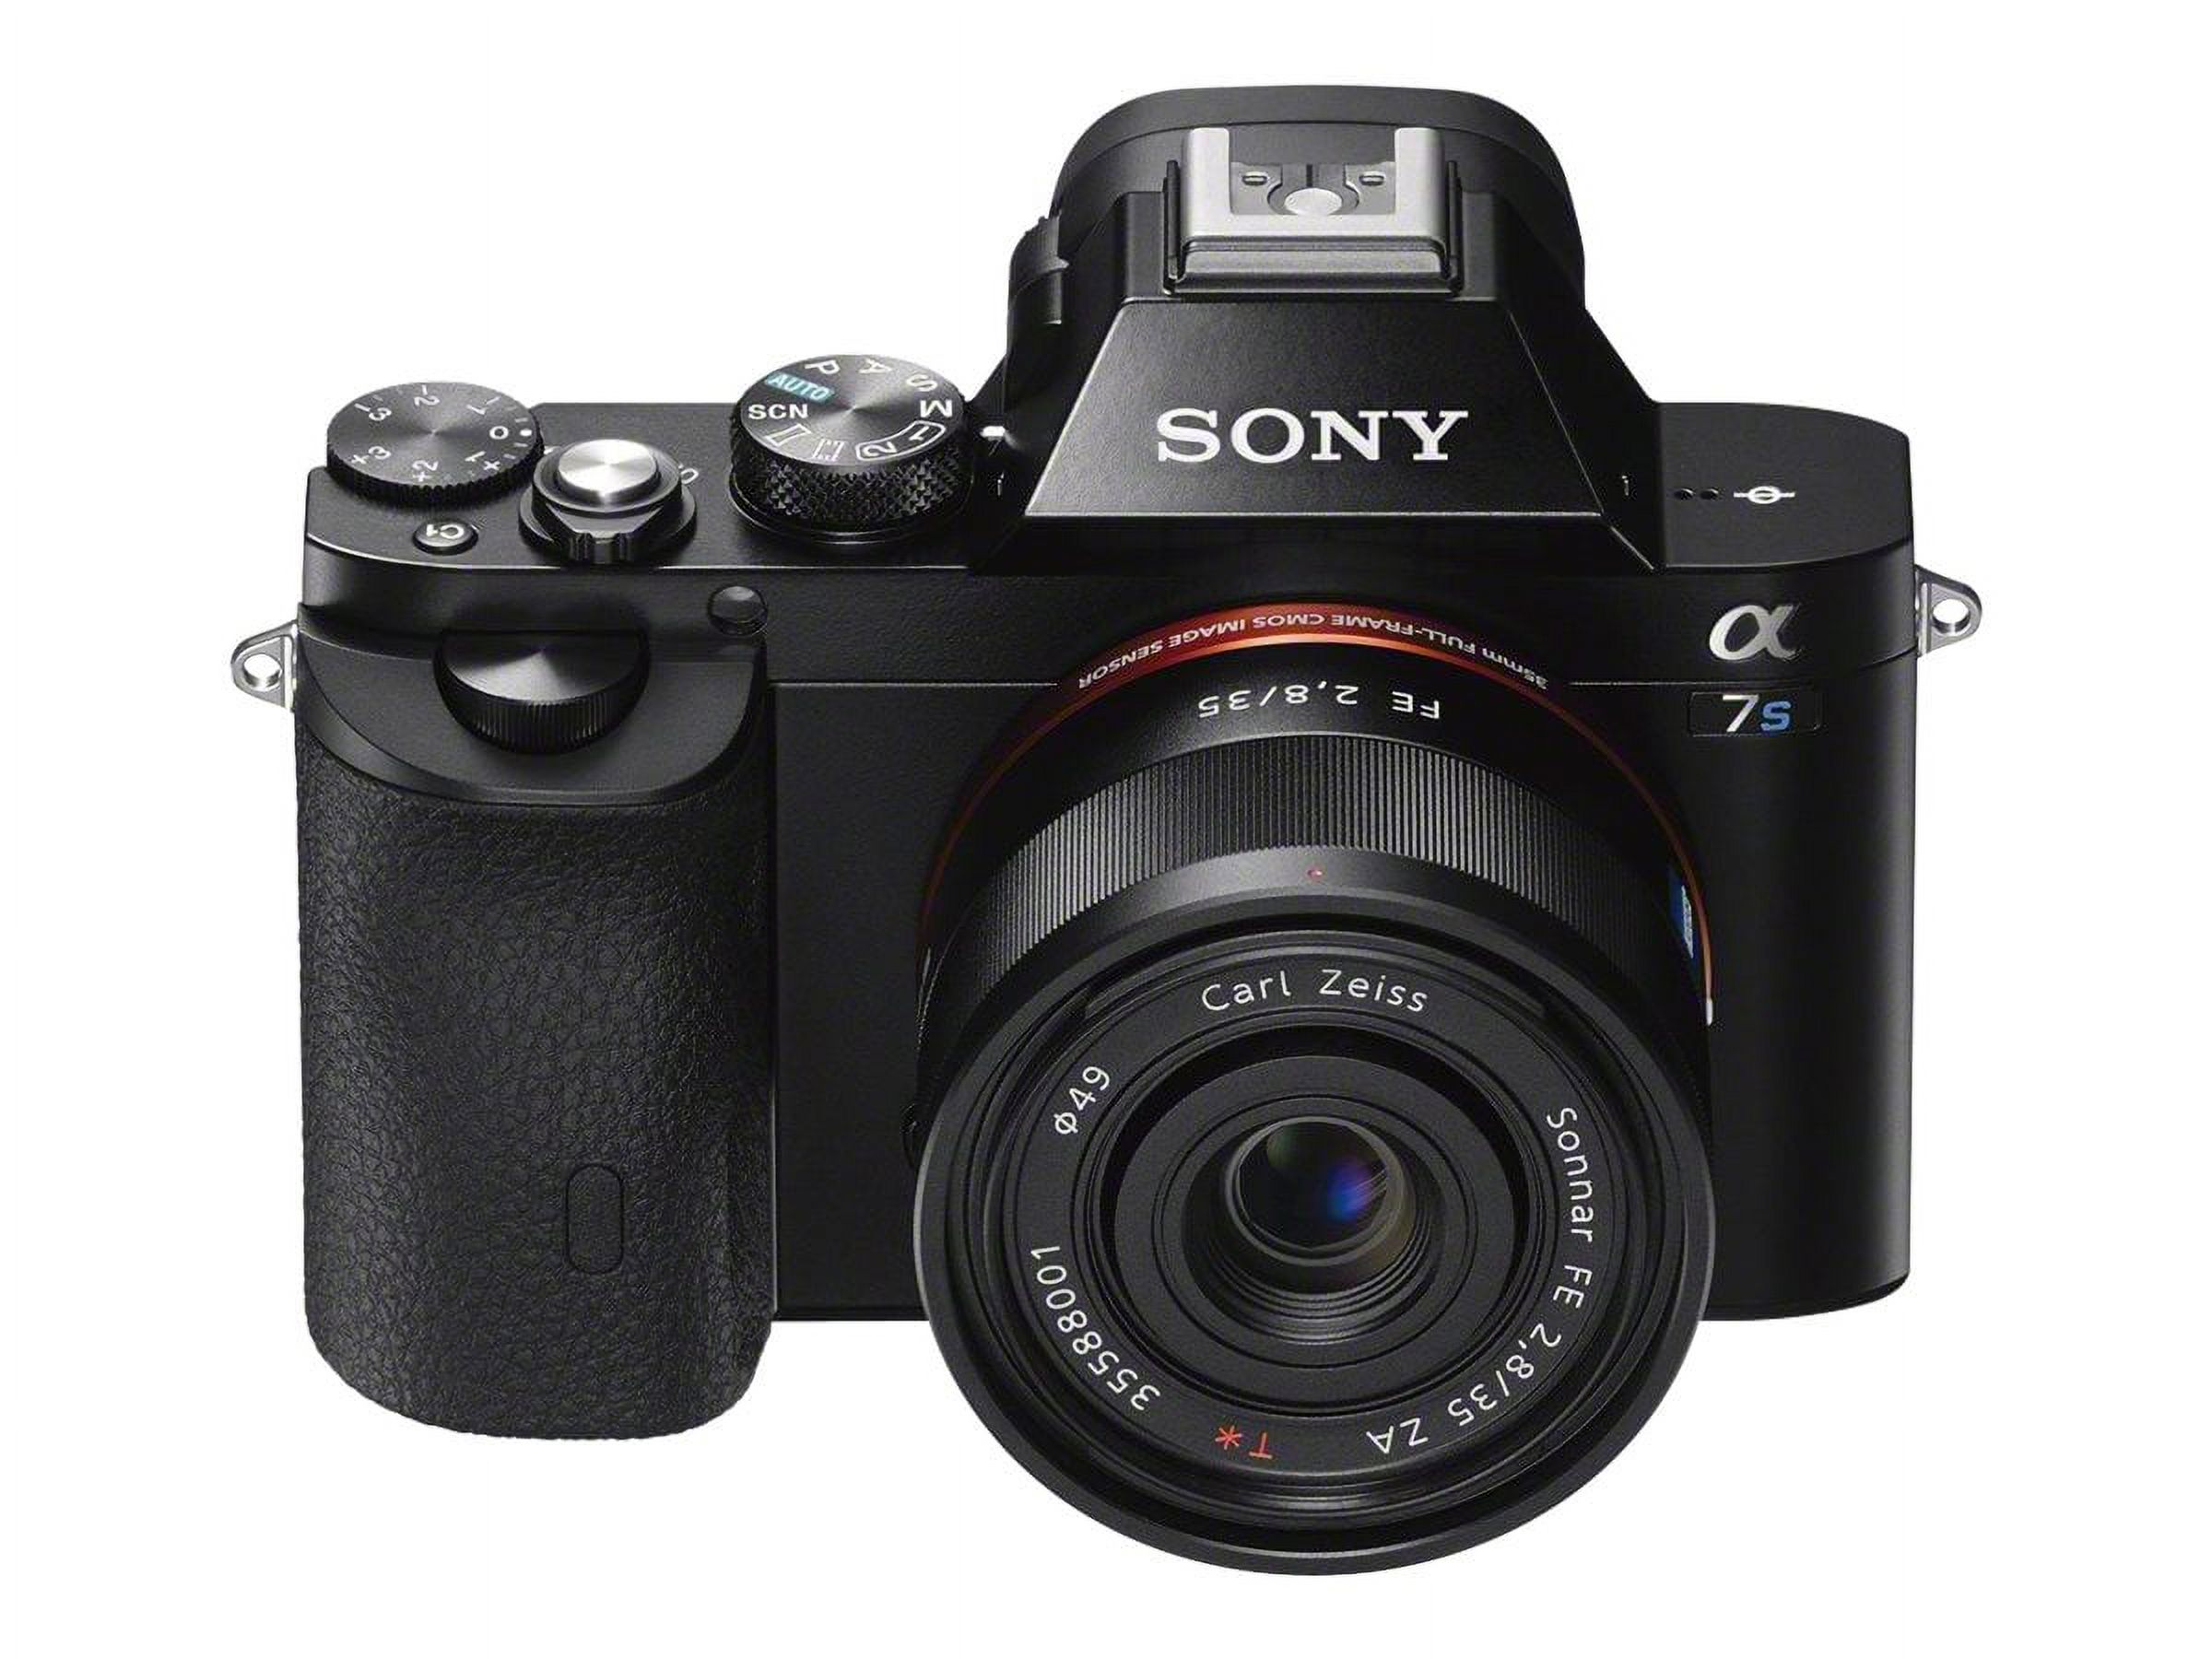 Sony a7s ILCE-7S - Digital camera - mirrorless - 12.2 MP - Full Frame - 1080p / 60 fps - body only - Wireless LAN, NFC - black - image 3 of 15